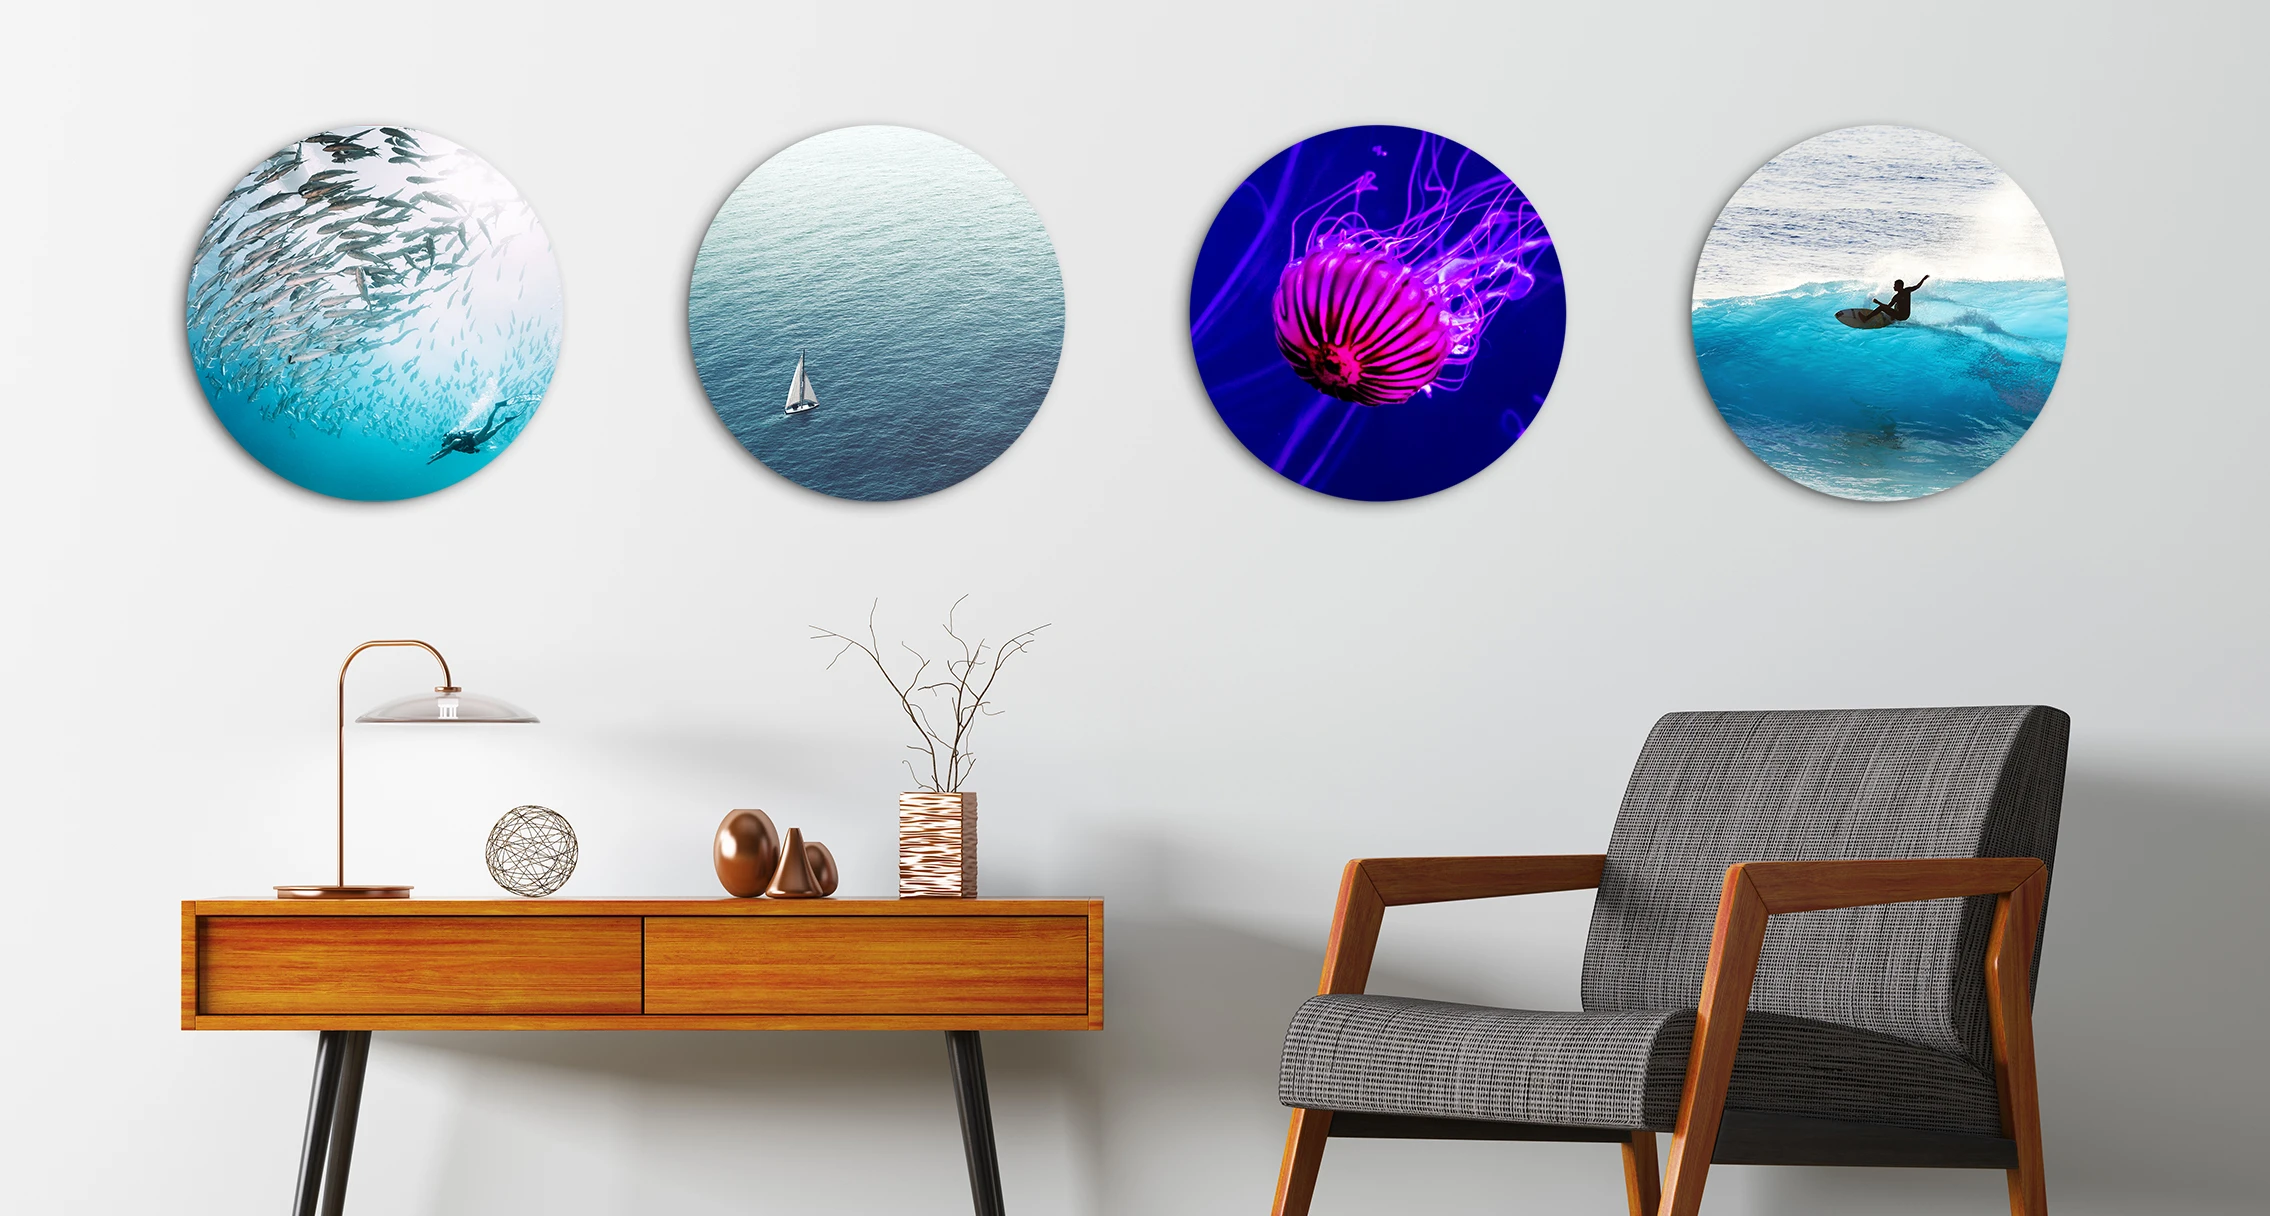 4 different round pictures with maritime motifs are hung next to each other on a wall. 